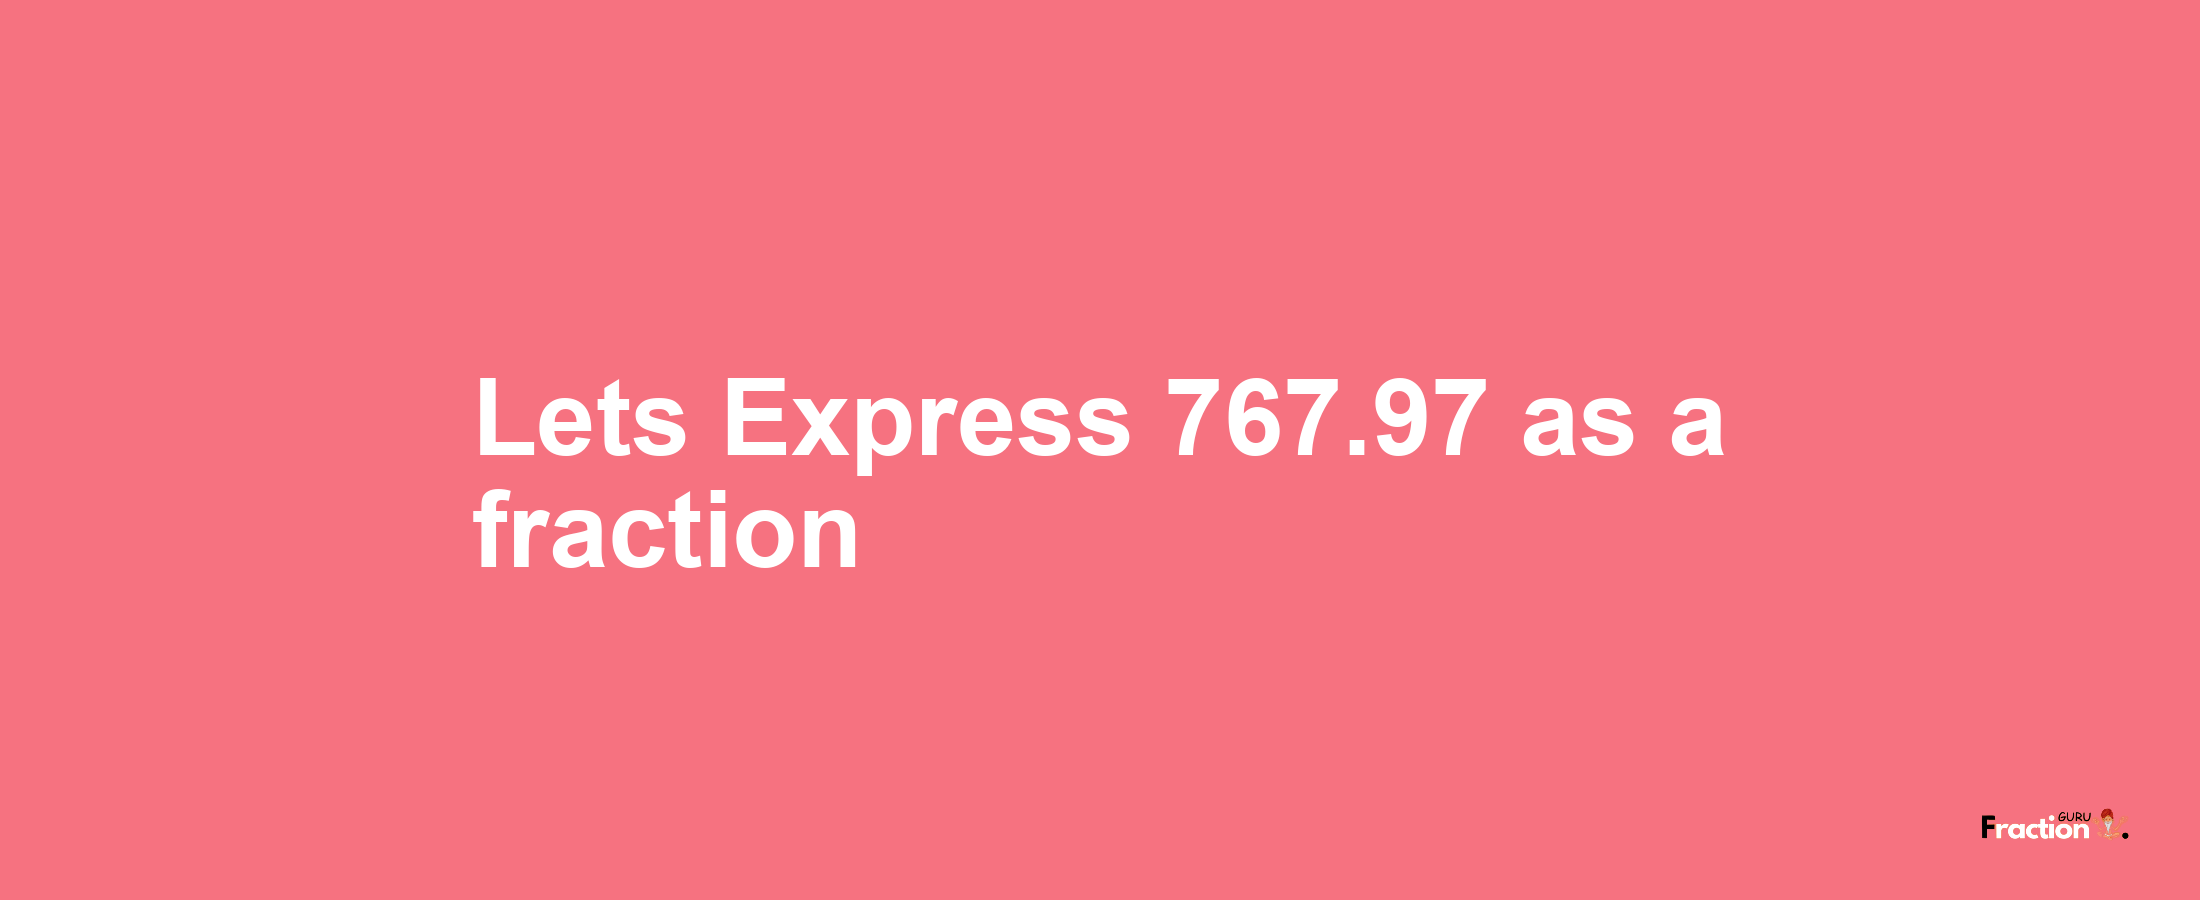 Lets Express 767.97 as afraction